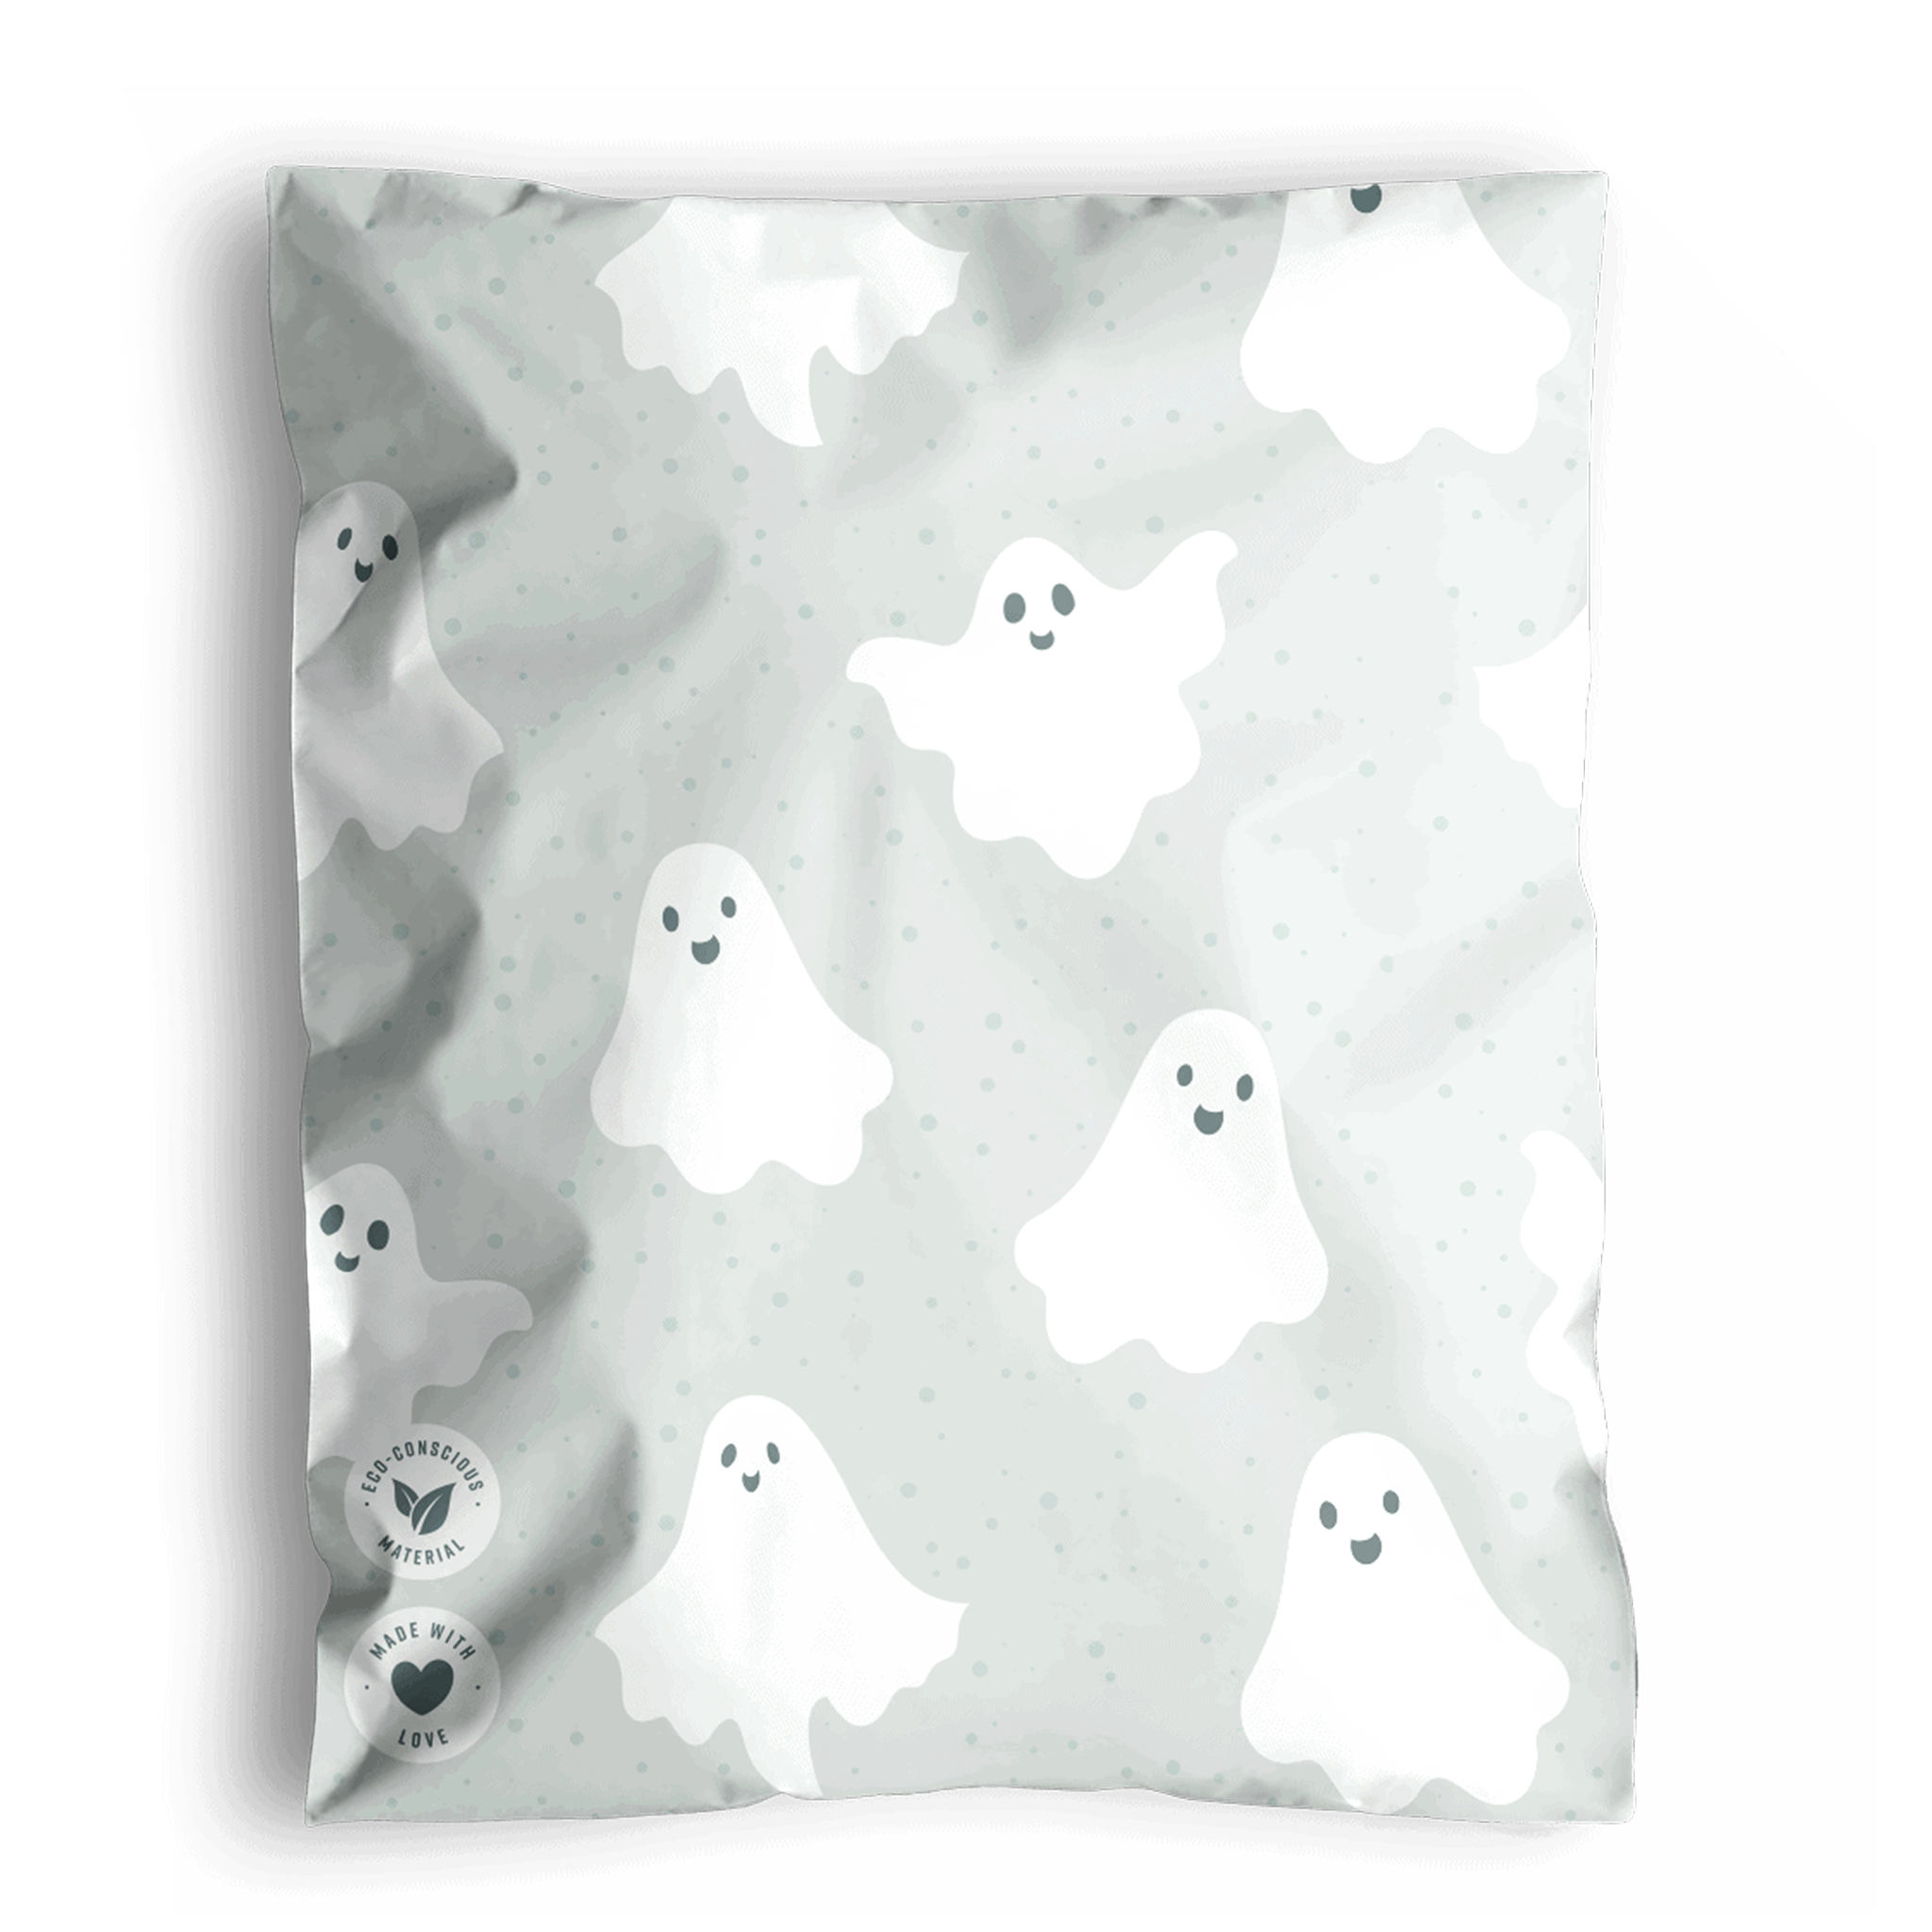 A Halloween Ghost Ivory Mailer 10" x 13" from impack.co, made from eco-friendly, biodegradable materials.